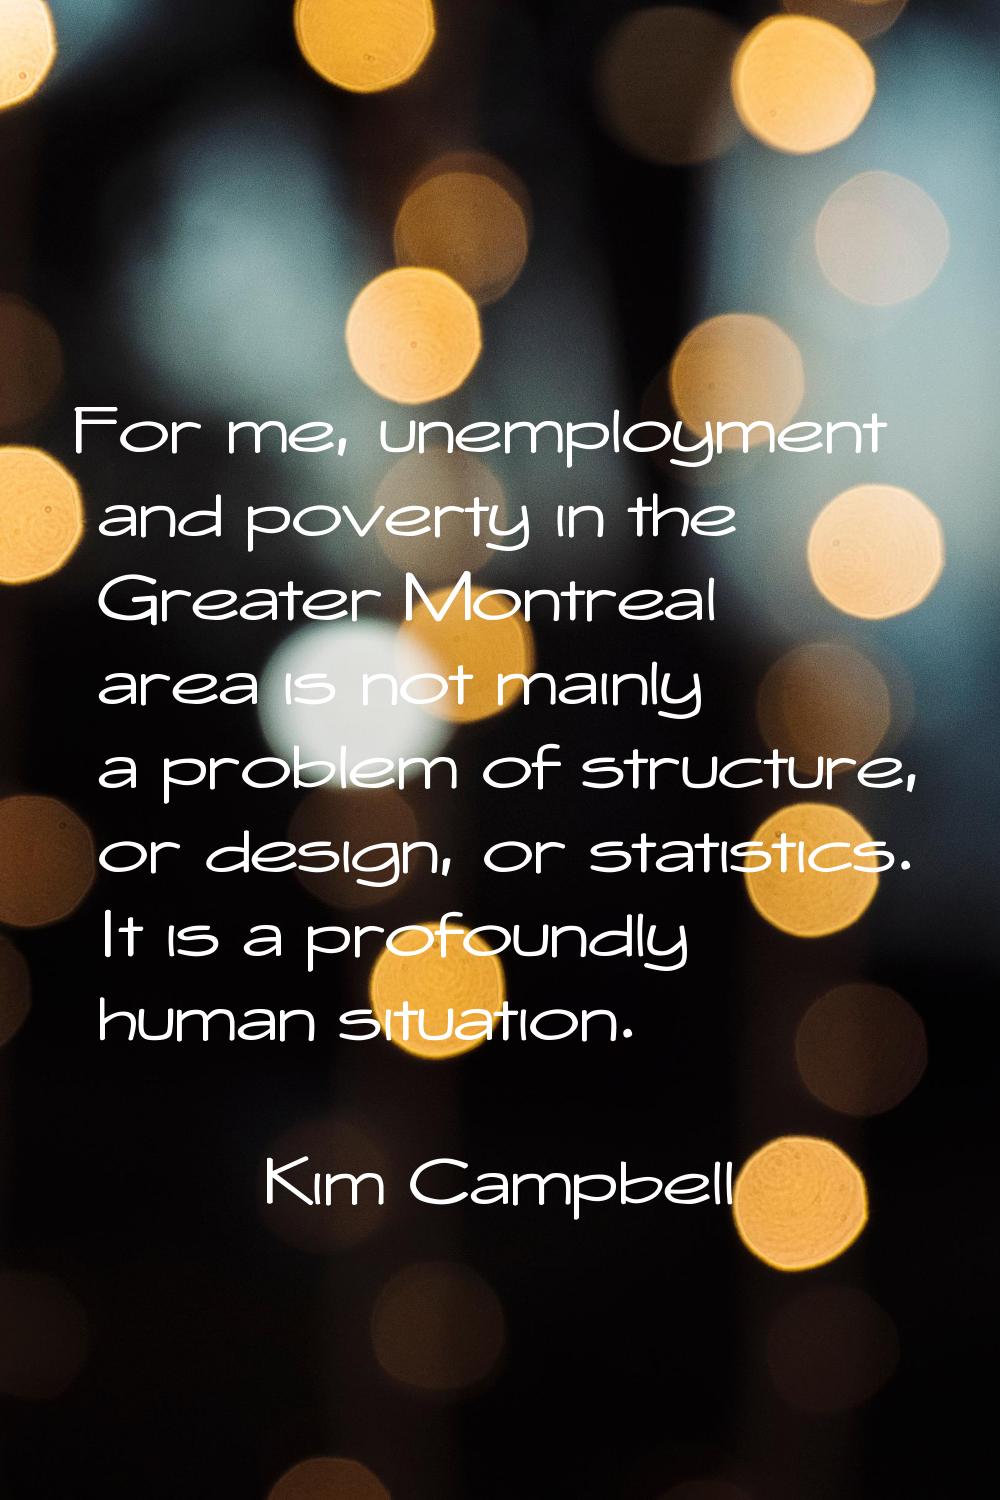 For me, unemployment and poverty in the Greater Montreal area is not mainly a problem of structure,